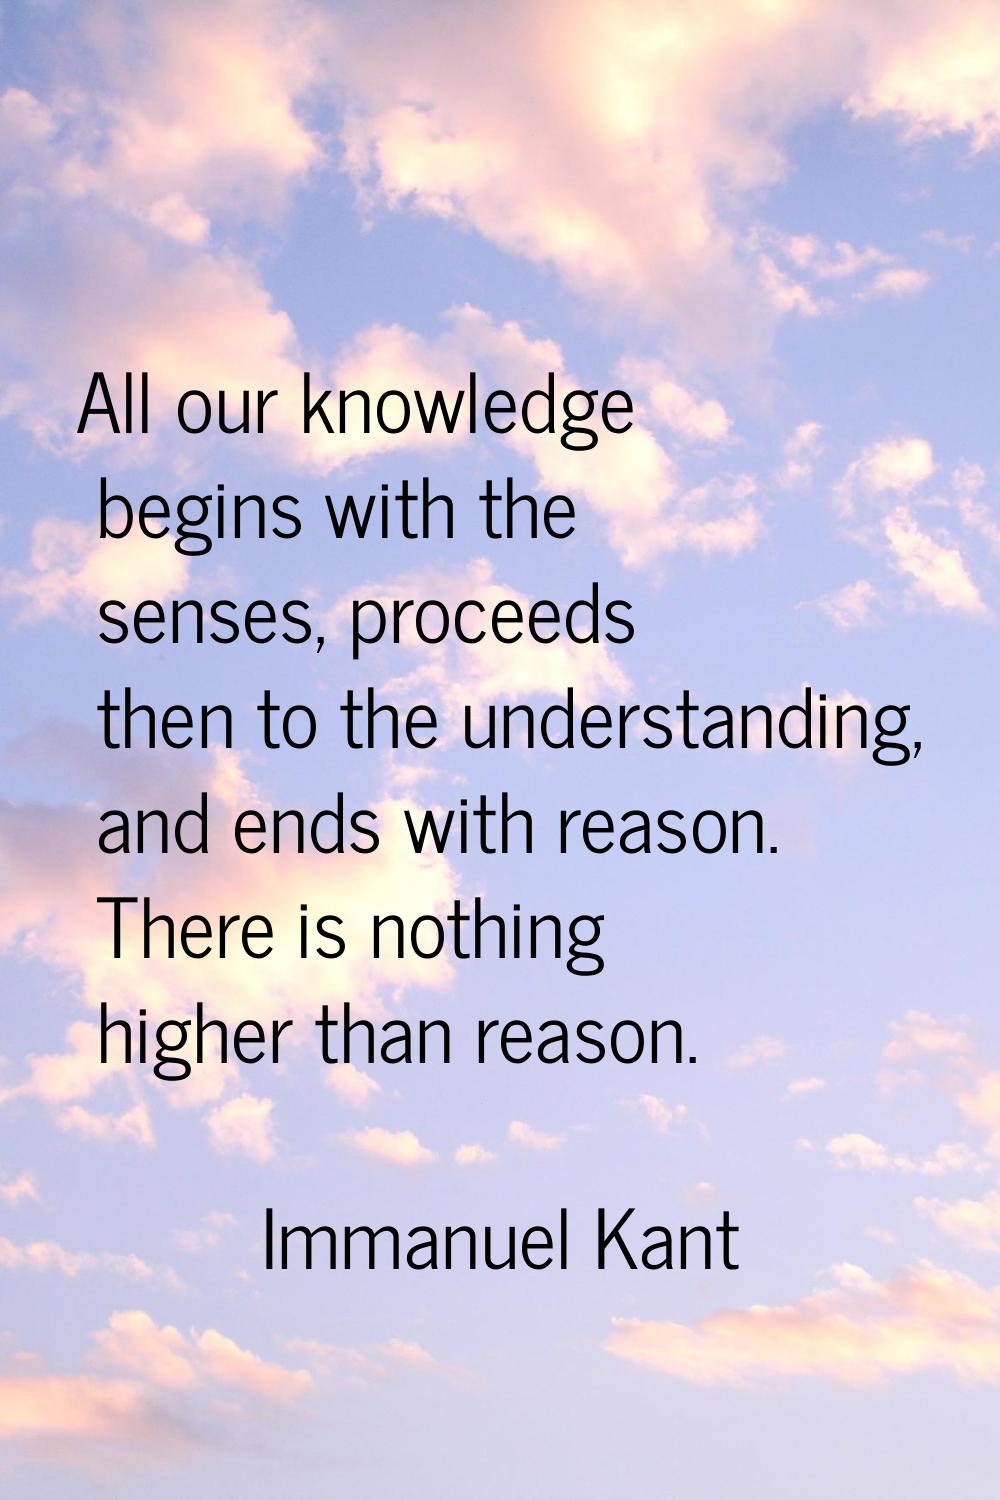 All our knowledge begins with the senses, proceeds then to the understanding, and ends with reason.